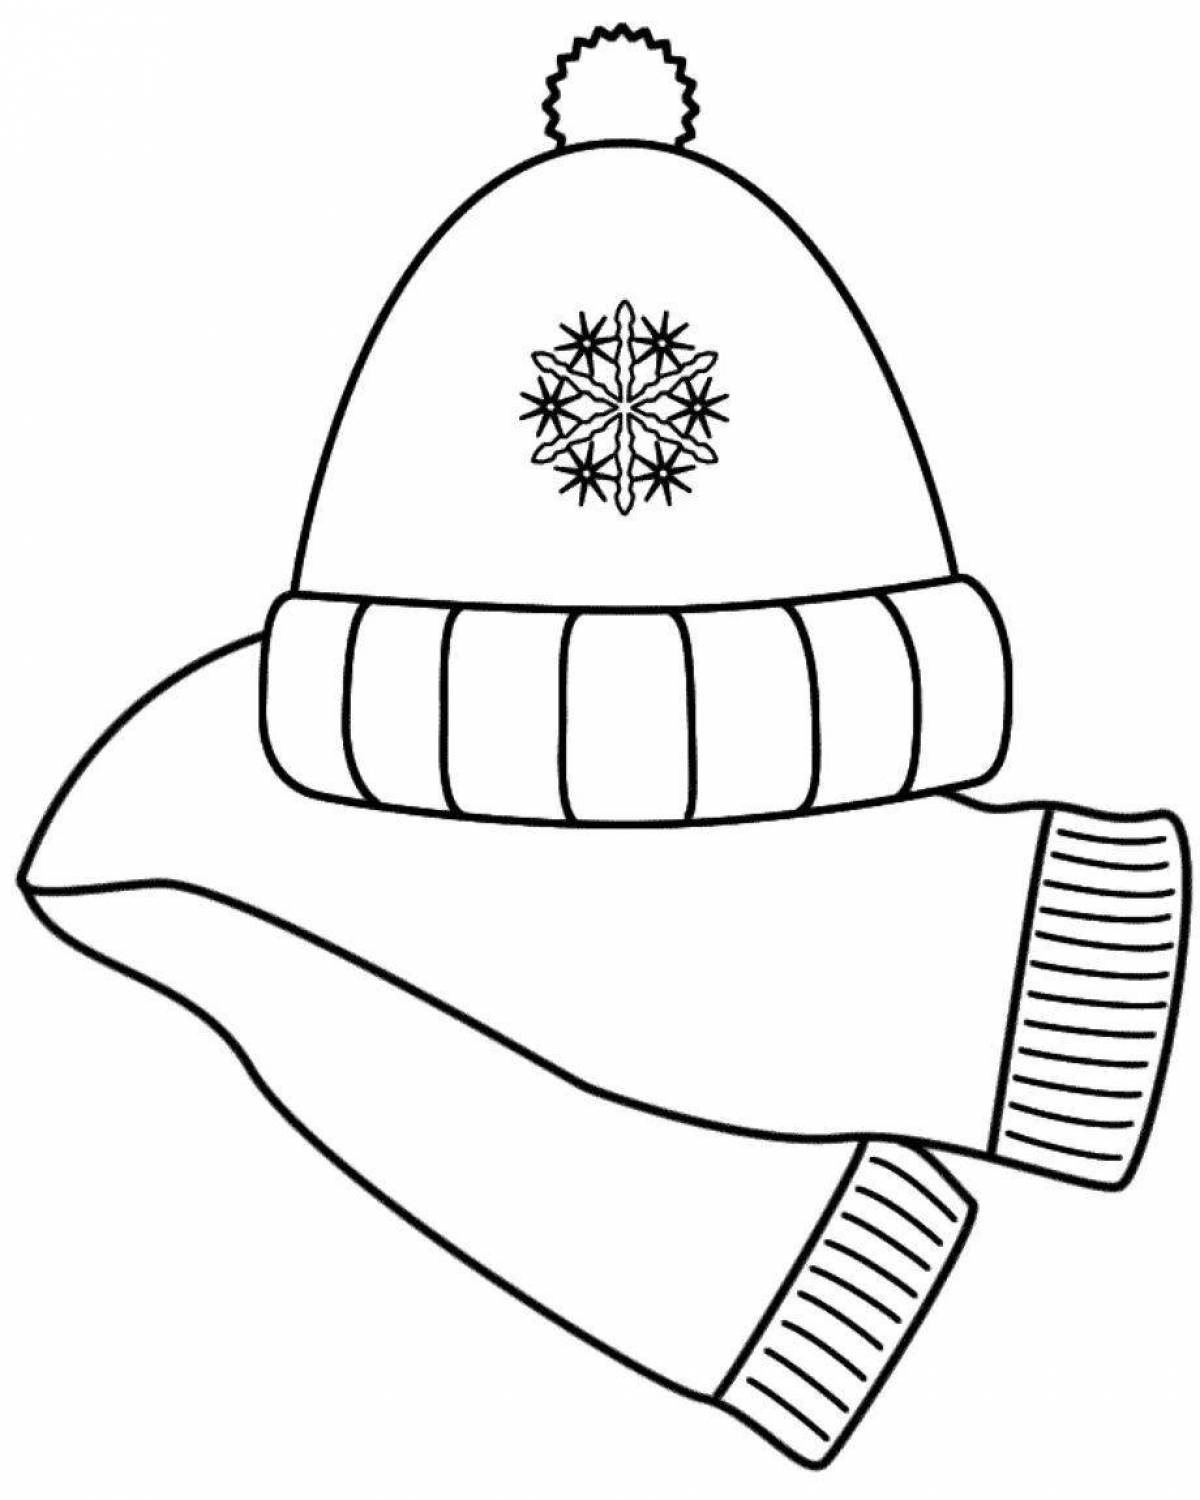 Great hat and scarf coloring for tykes